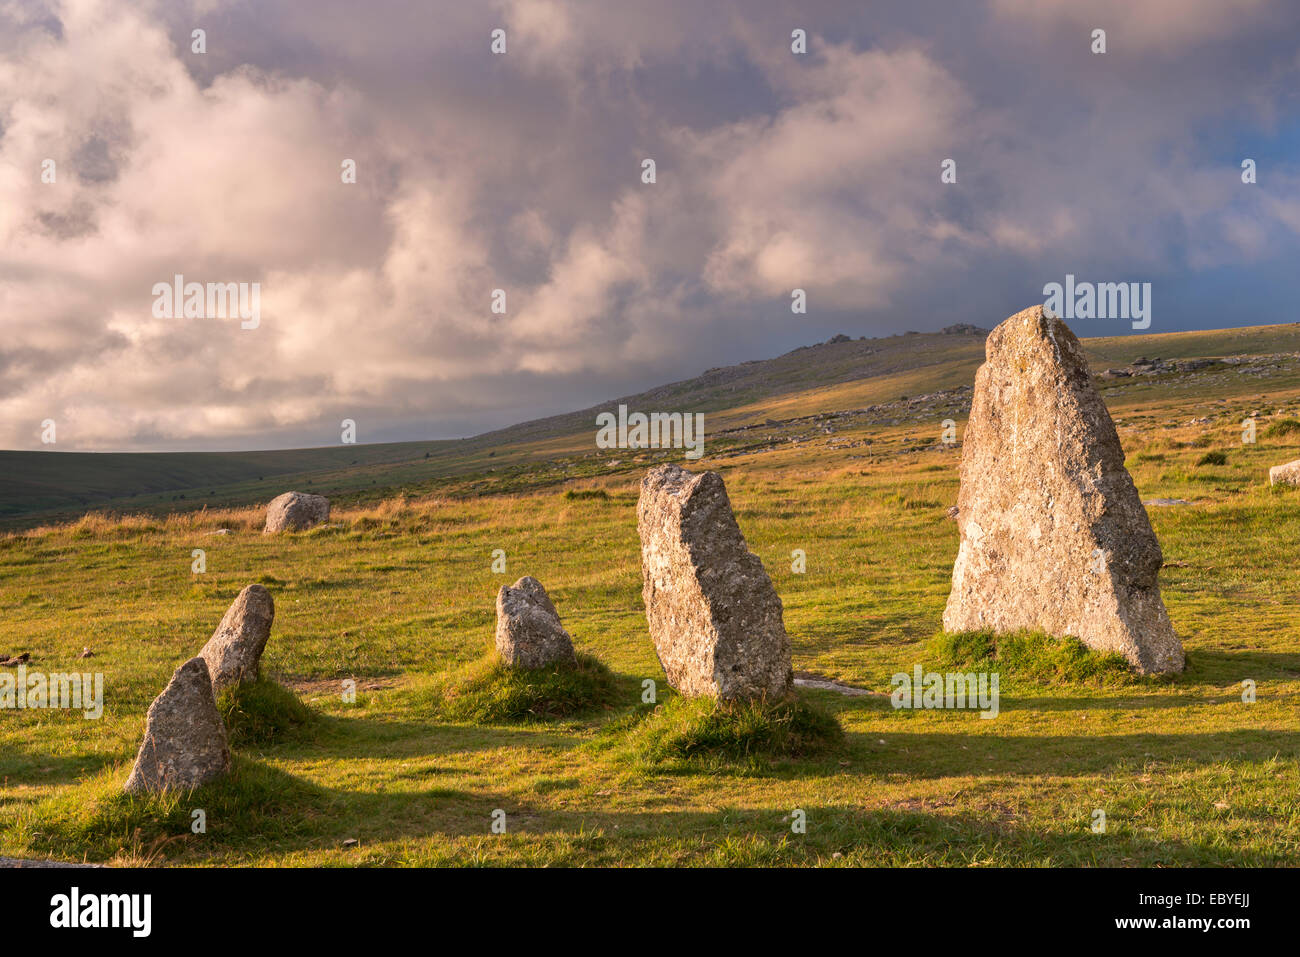 Megalithic standing stones, part of Merrivale stone row, Dartmoor, Devon, England. Summer (July) 2014. Stock Photo